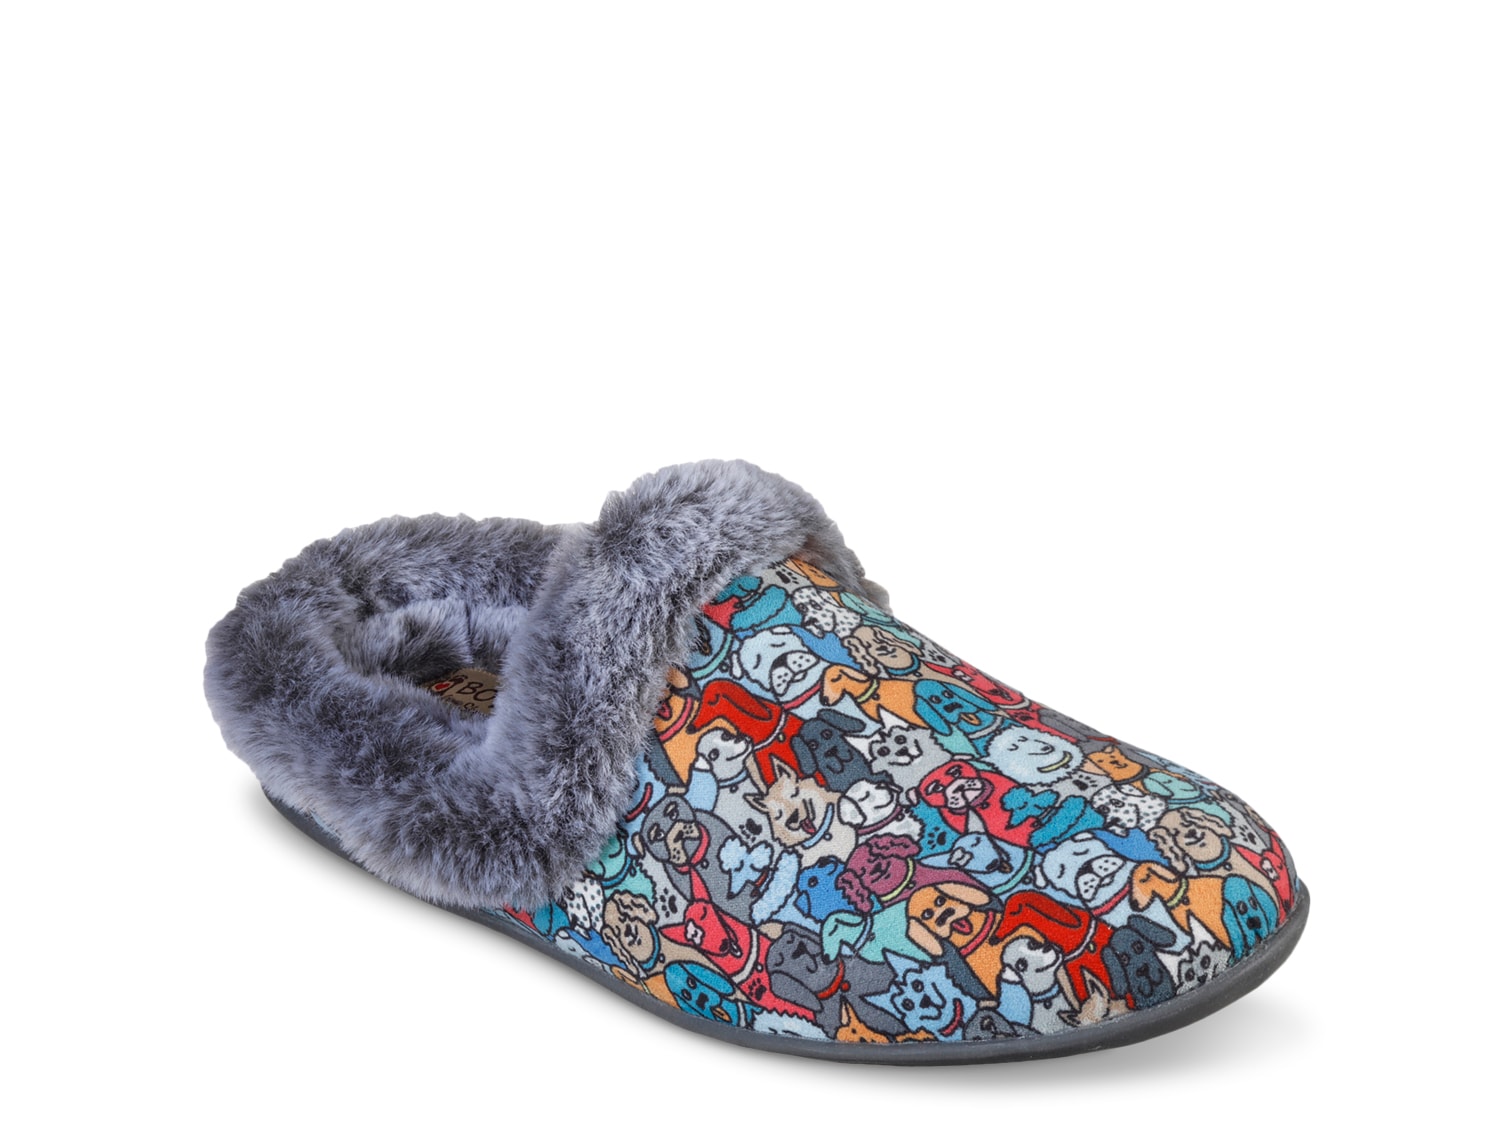 bobs by skechers slippers